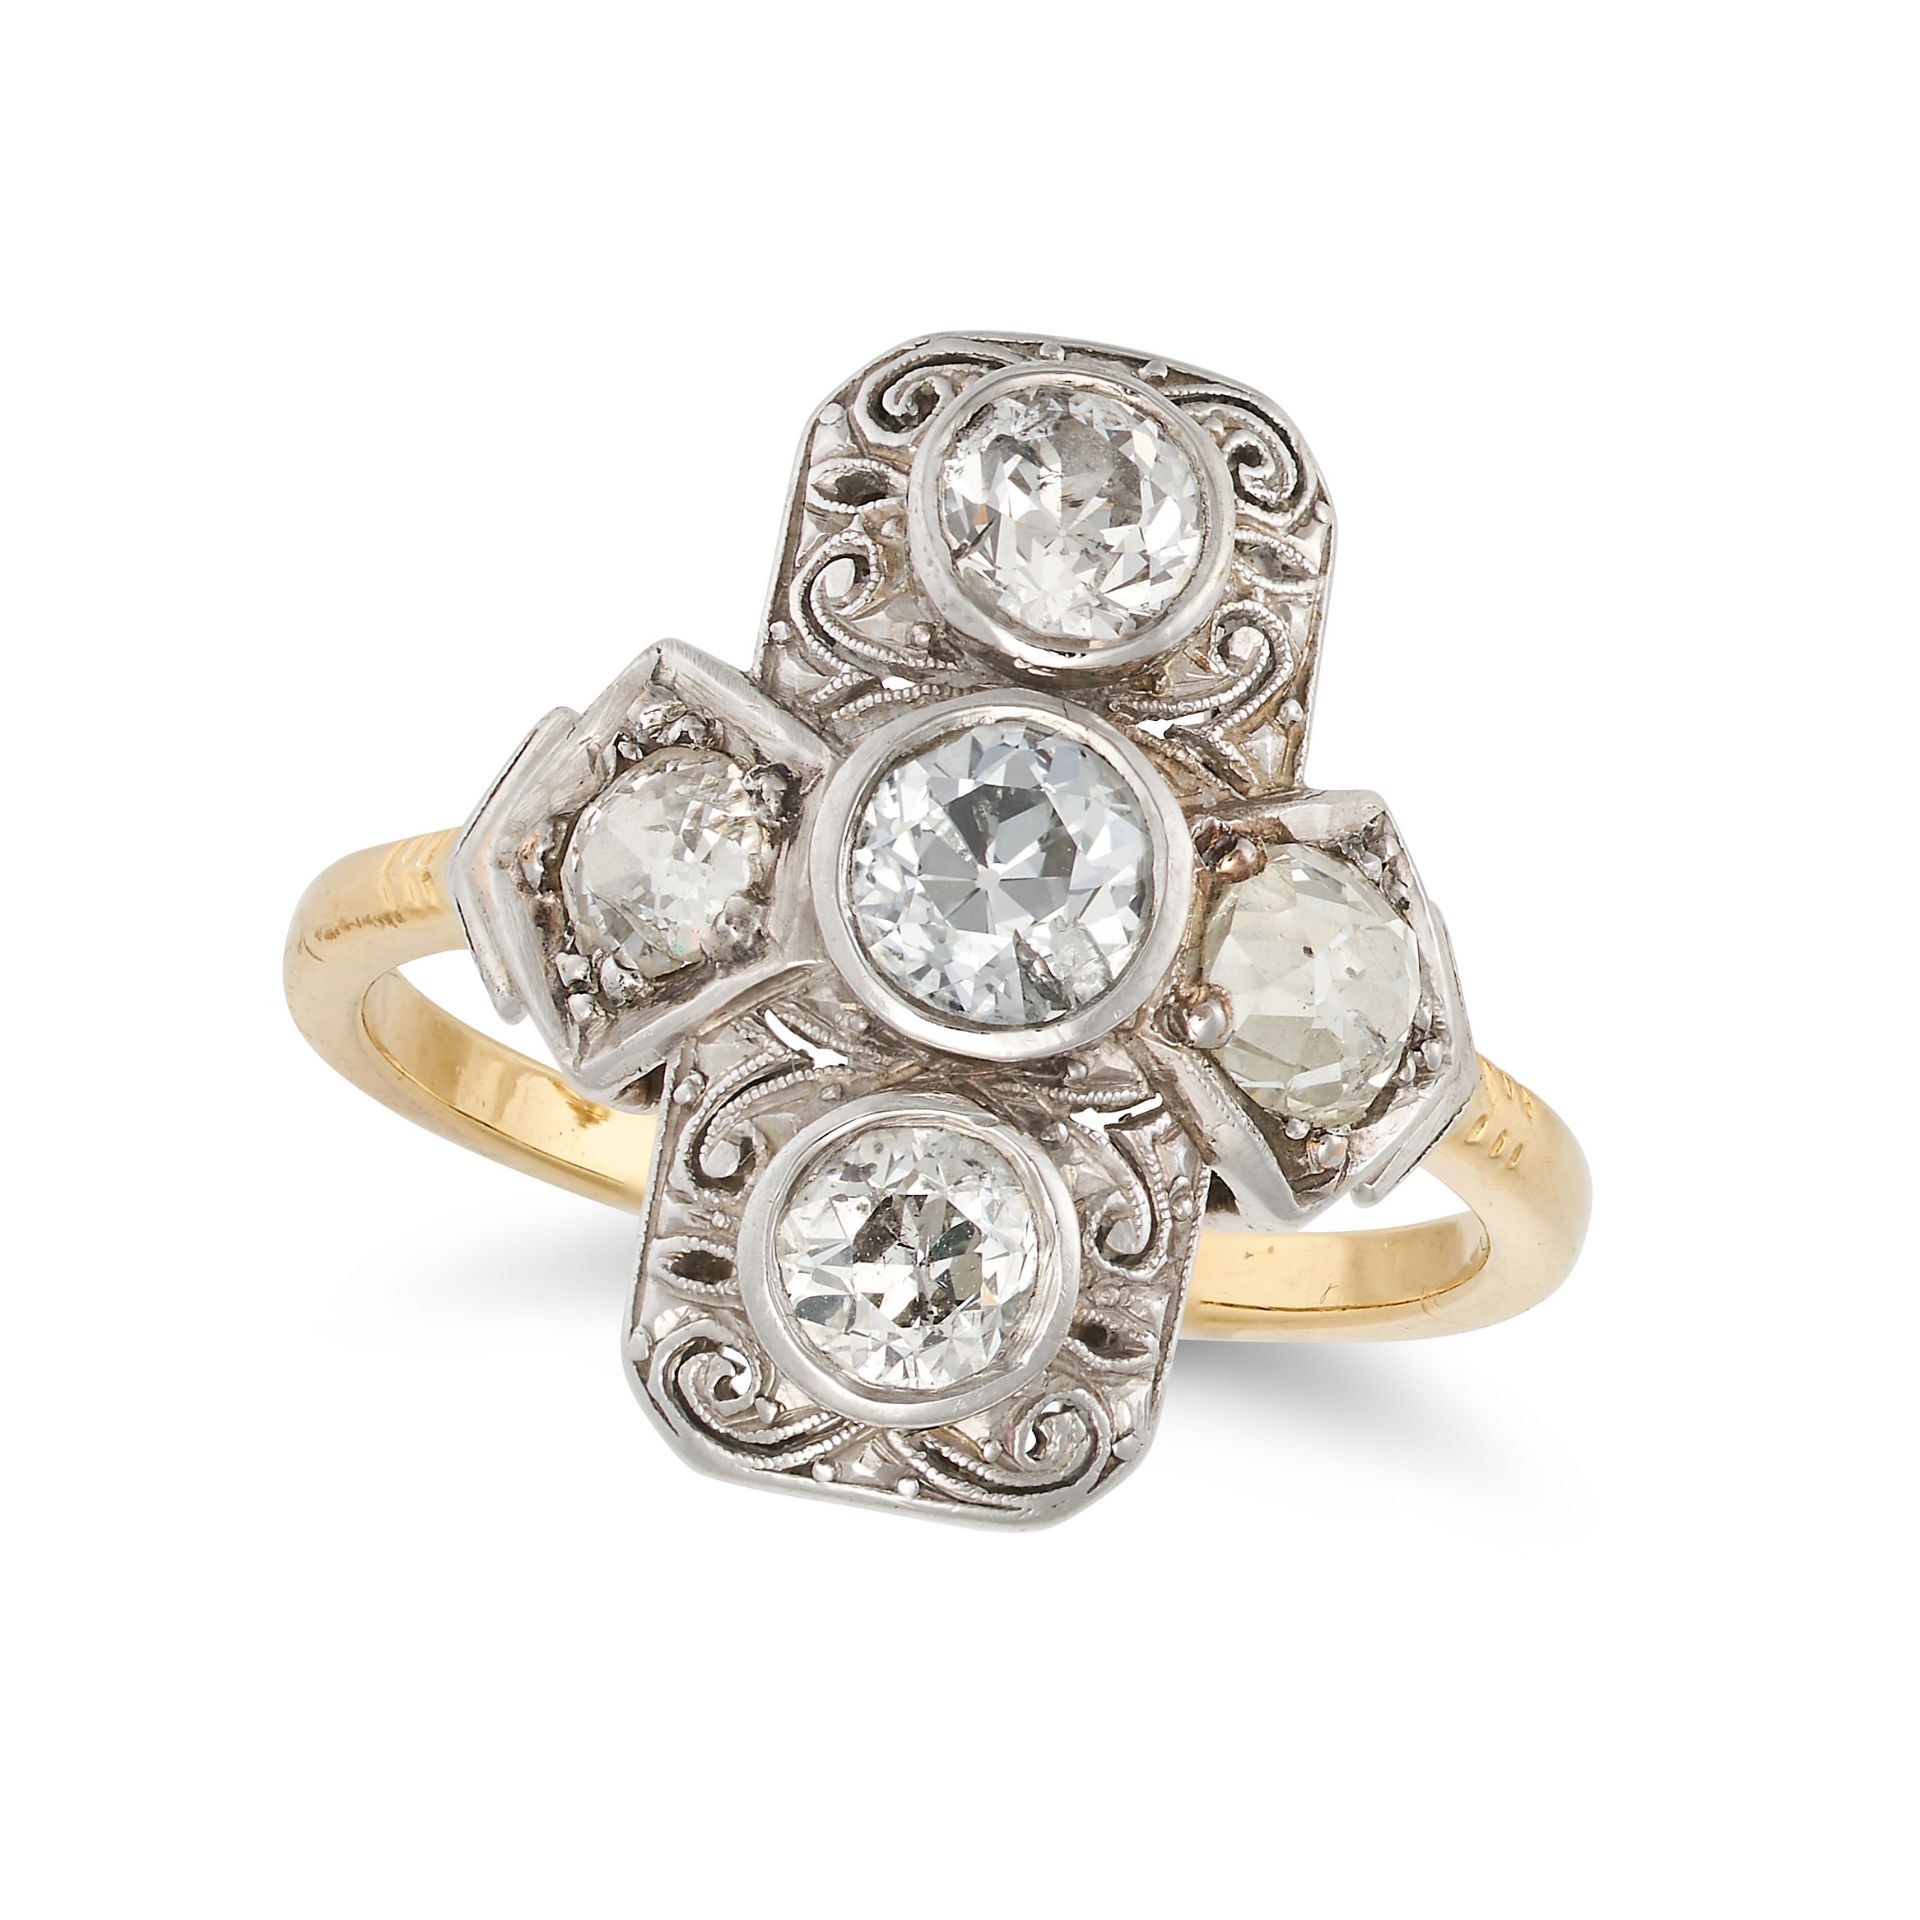 AN ANTIQUE DIAMOND DRESS RING in yellow gold, set with a row of three old cut diamonds, accented ...